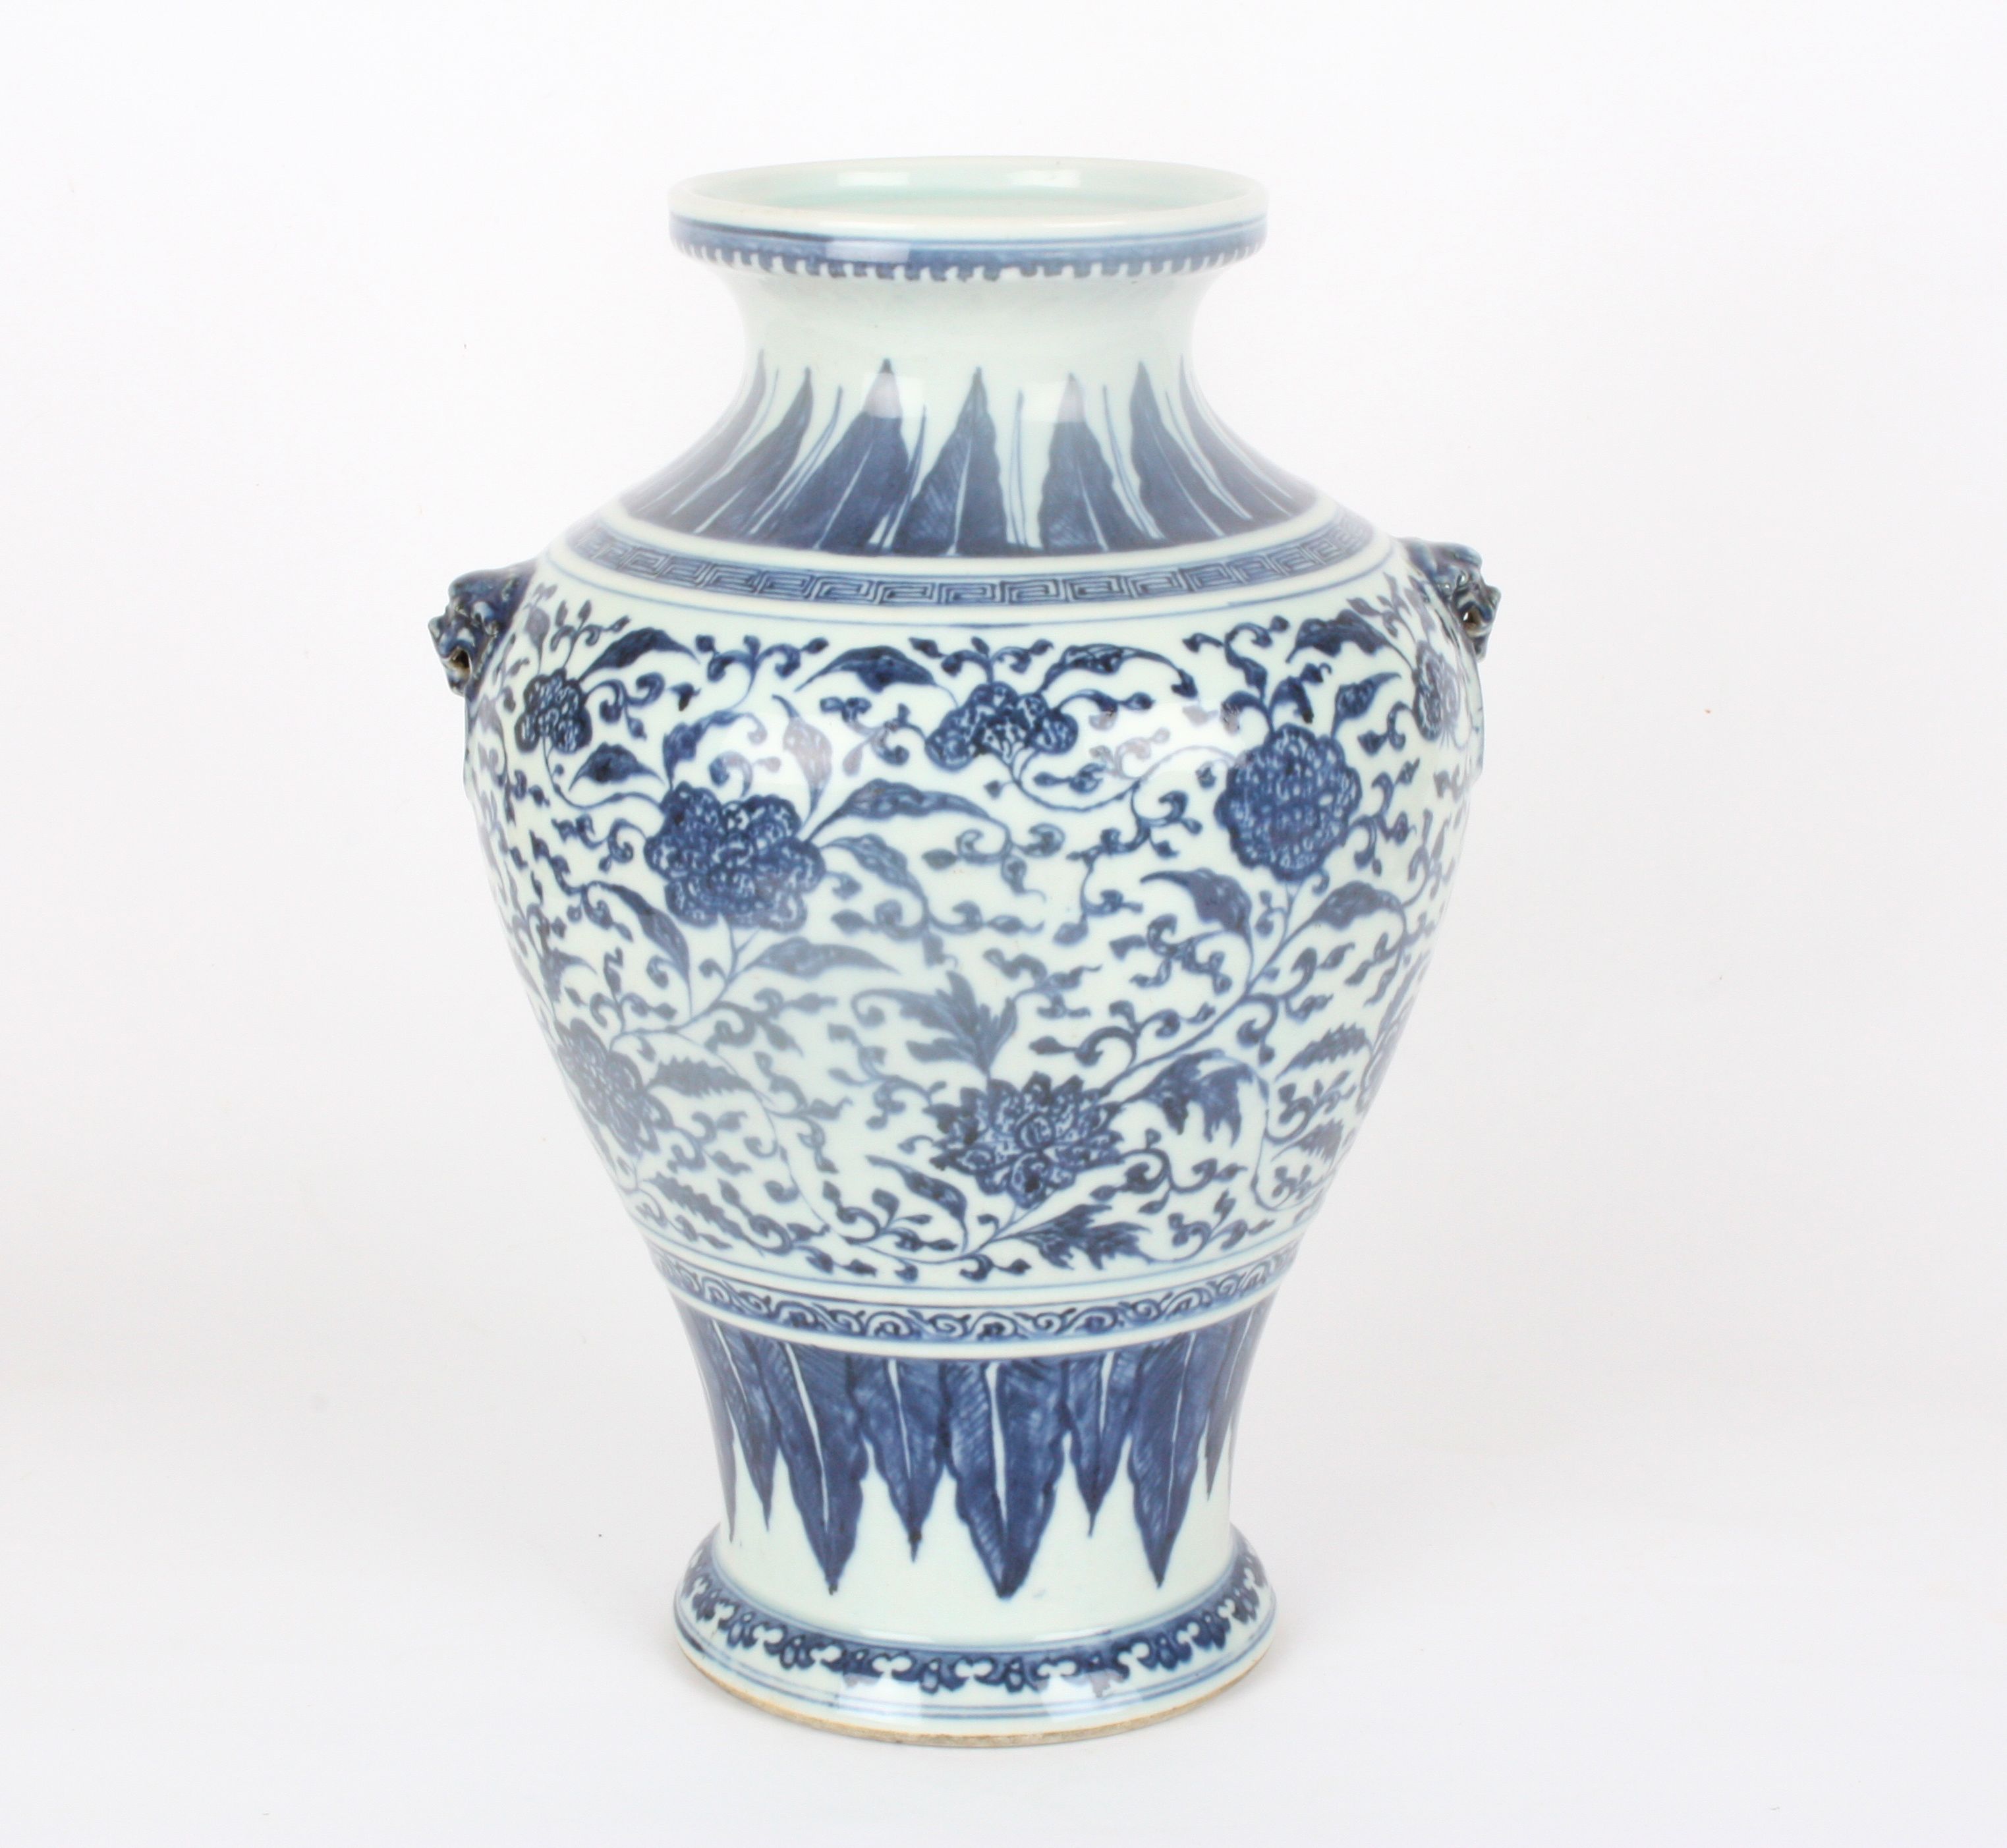 A large late 19th century Chinese blue and white jar
of inverted baluster form, the neck decorated